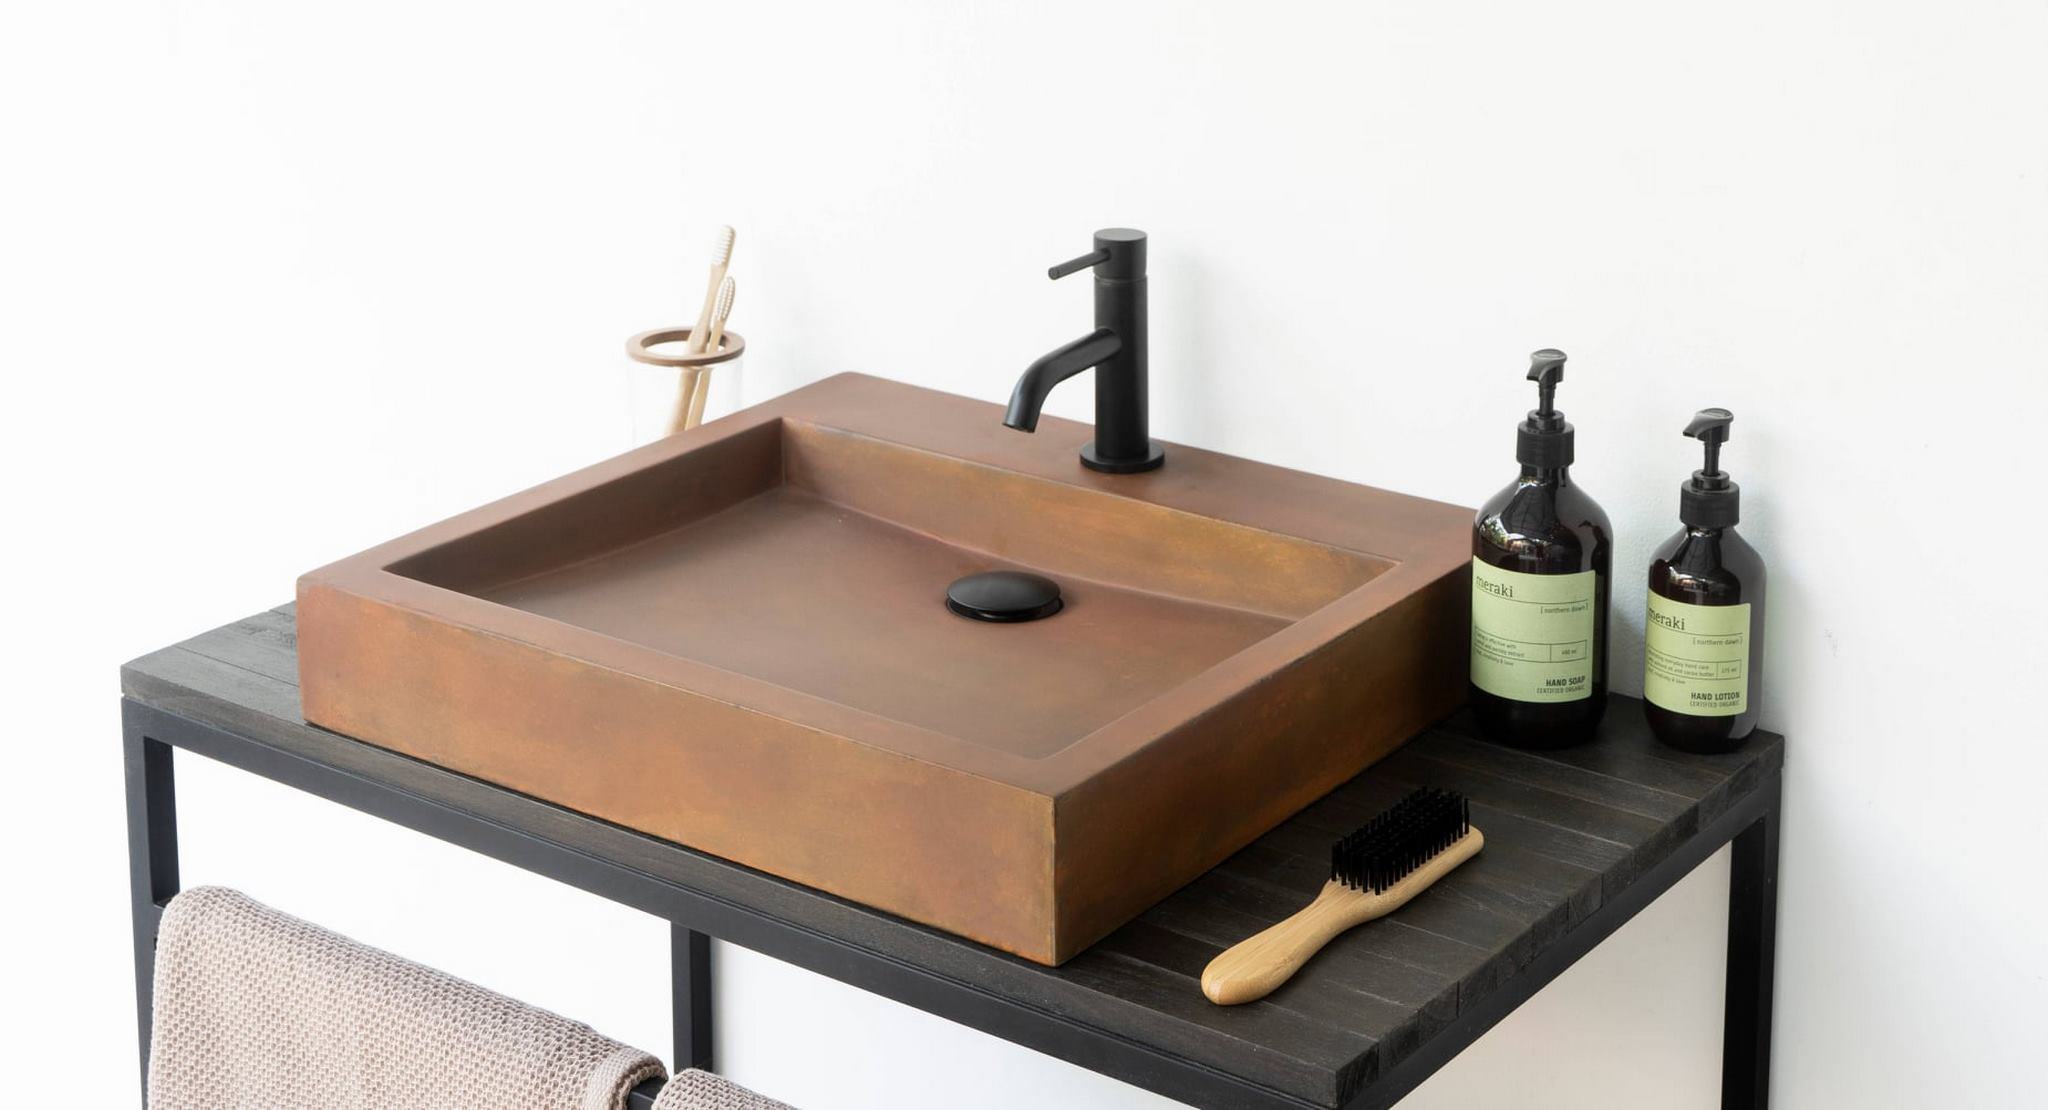 Square concrete sink with taphole